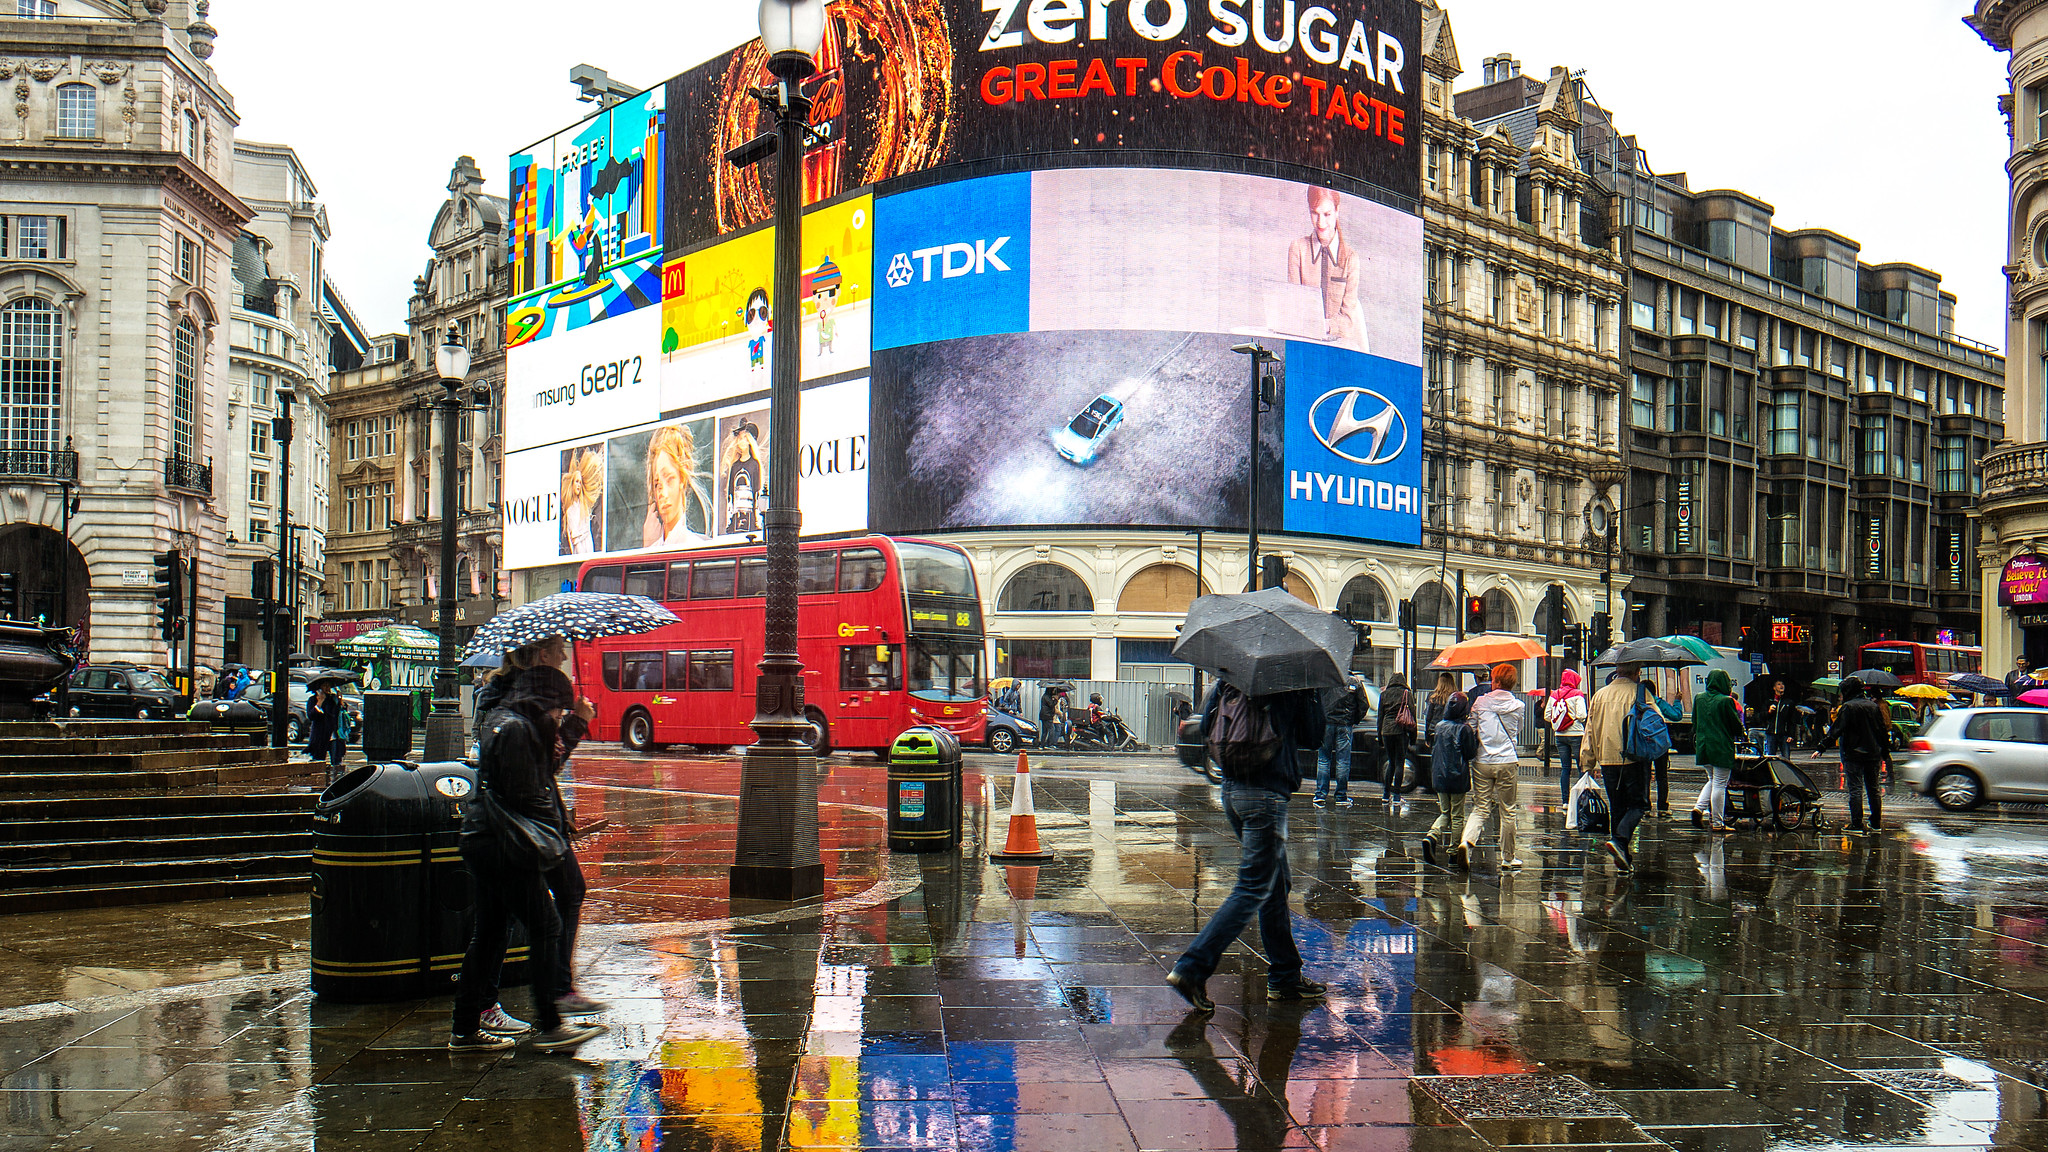 Piccadilly Circus in the Rain